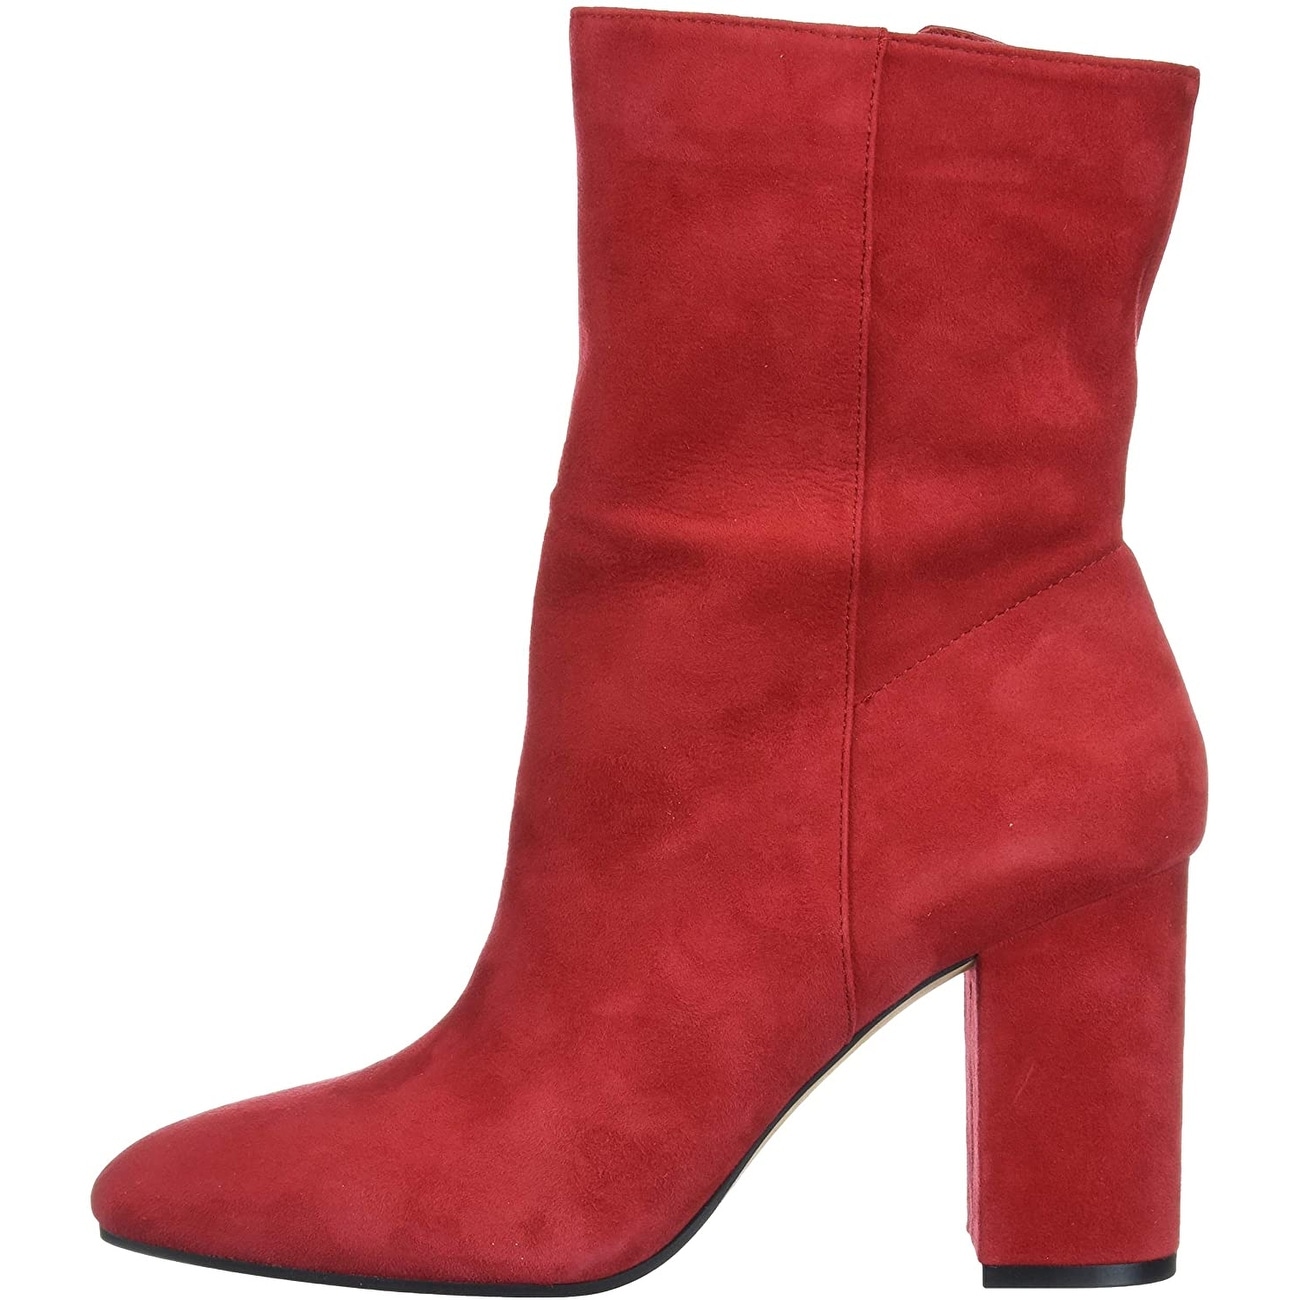 jessica simpson red boots